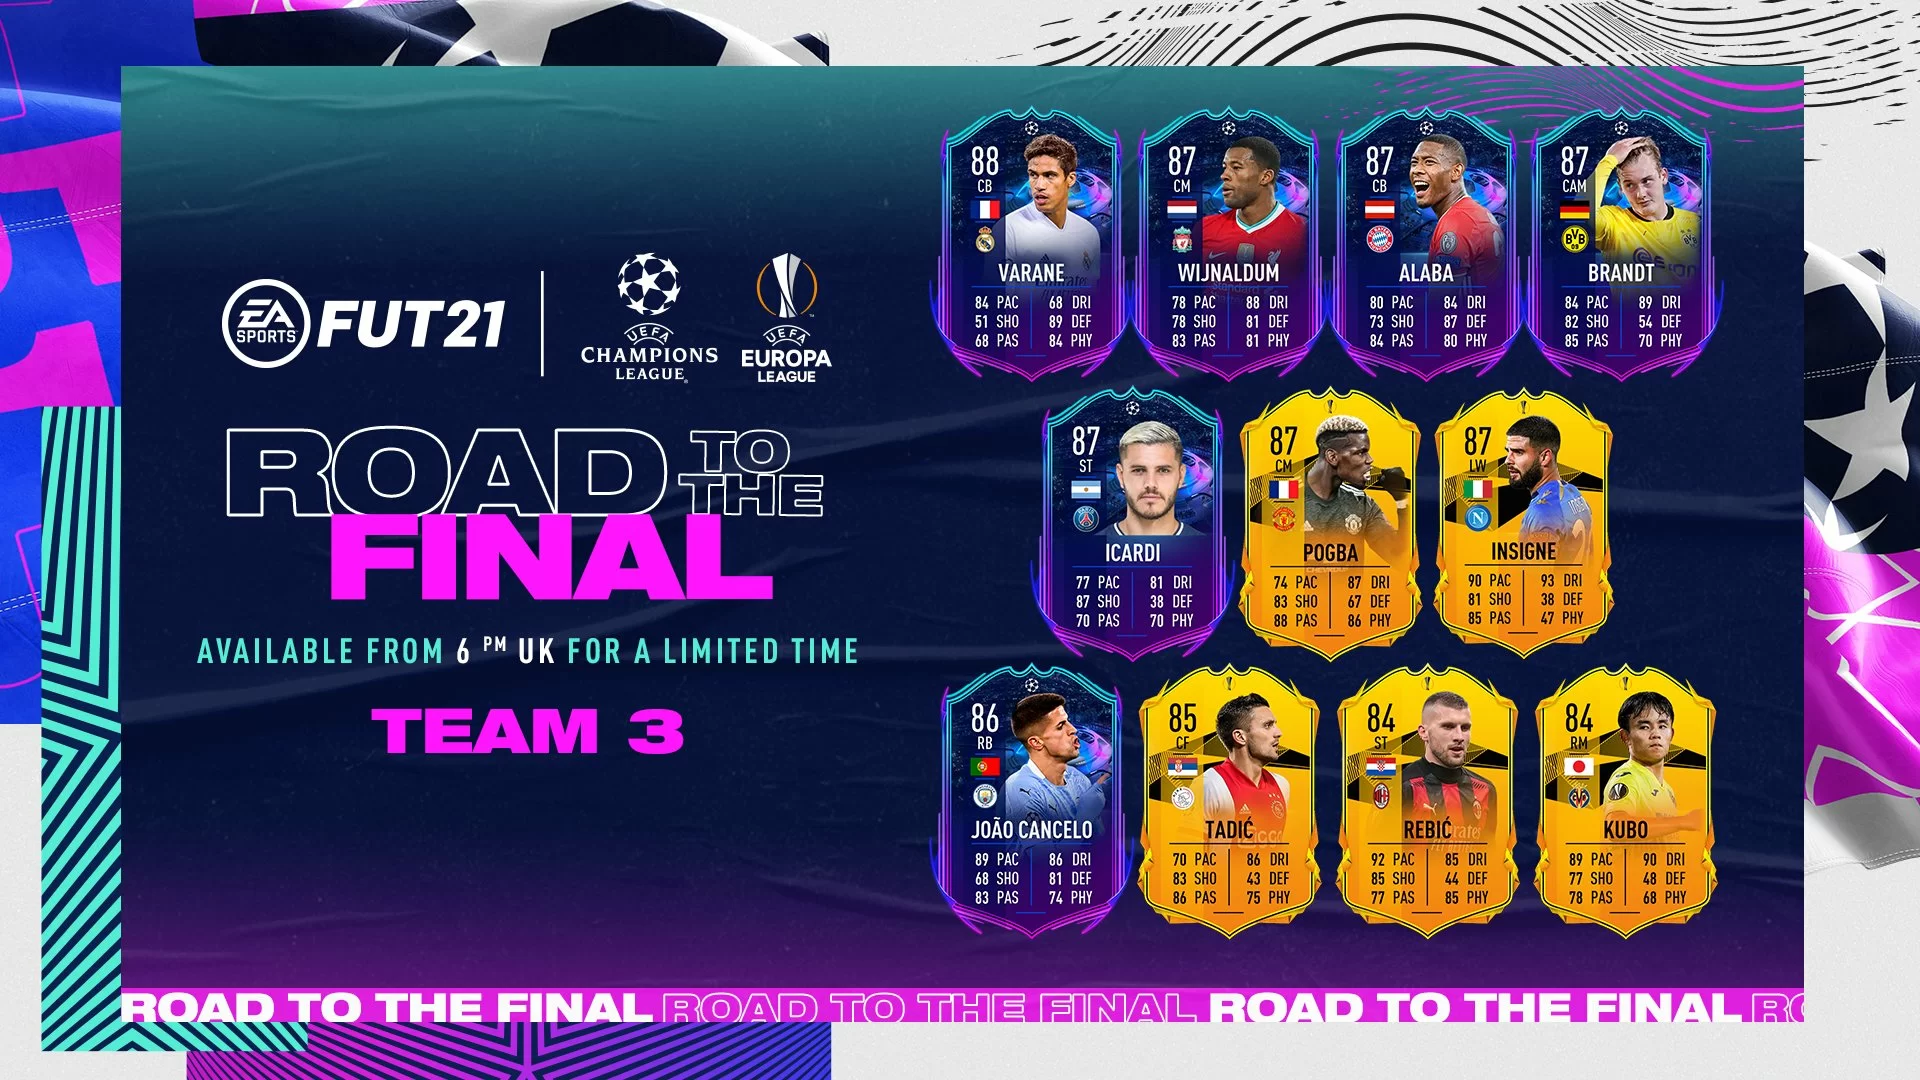 Road to the Final Team 3